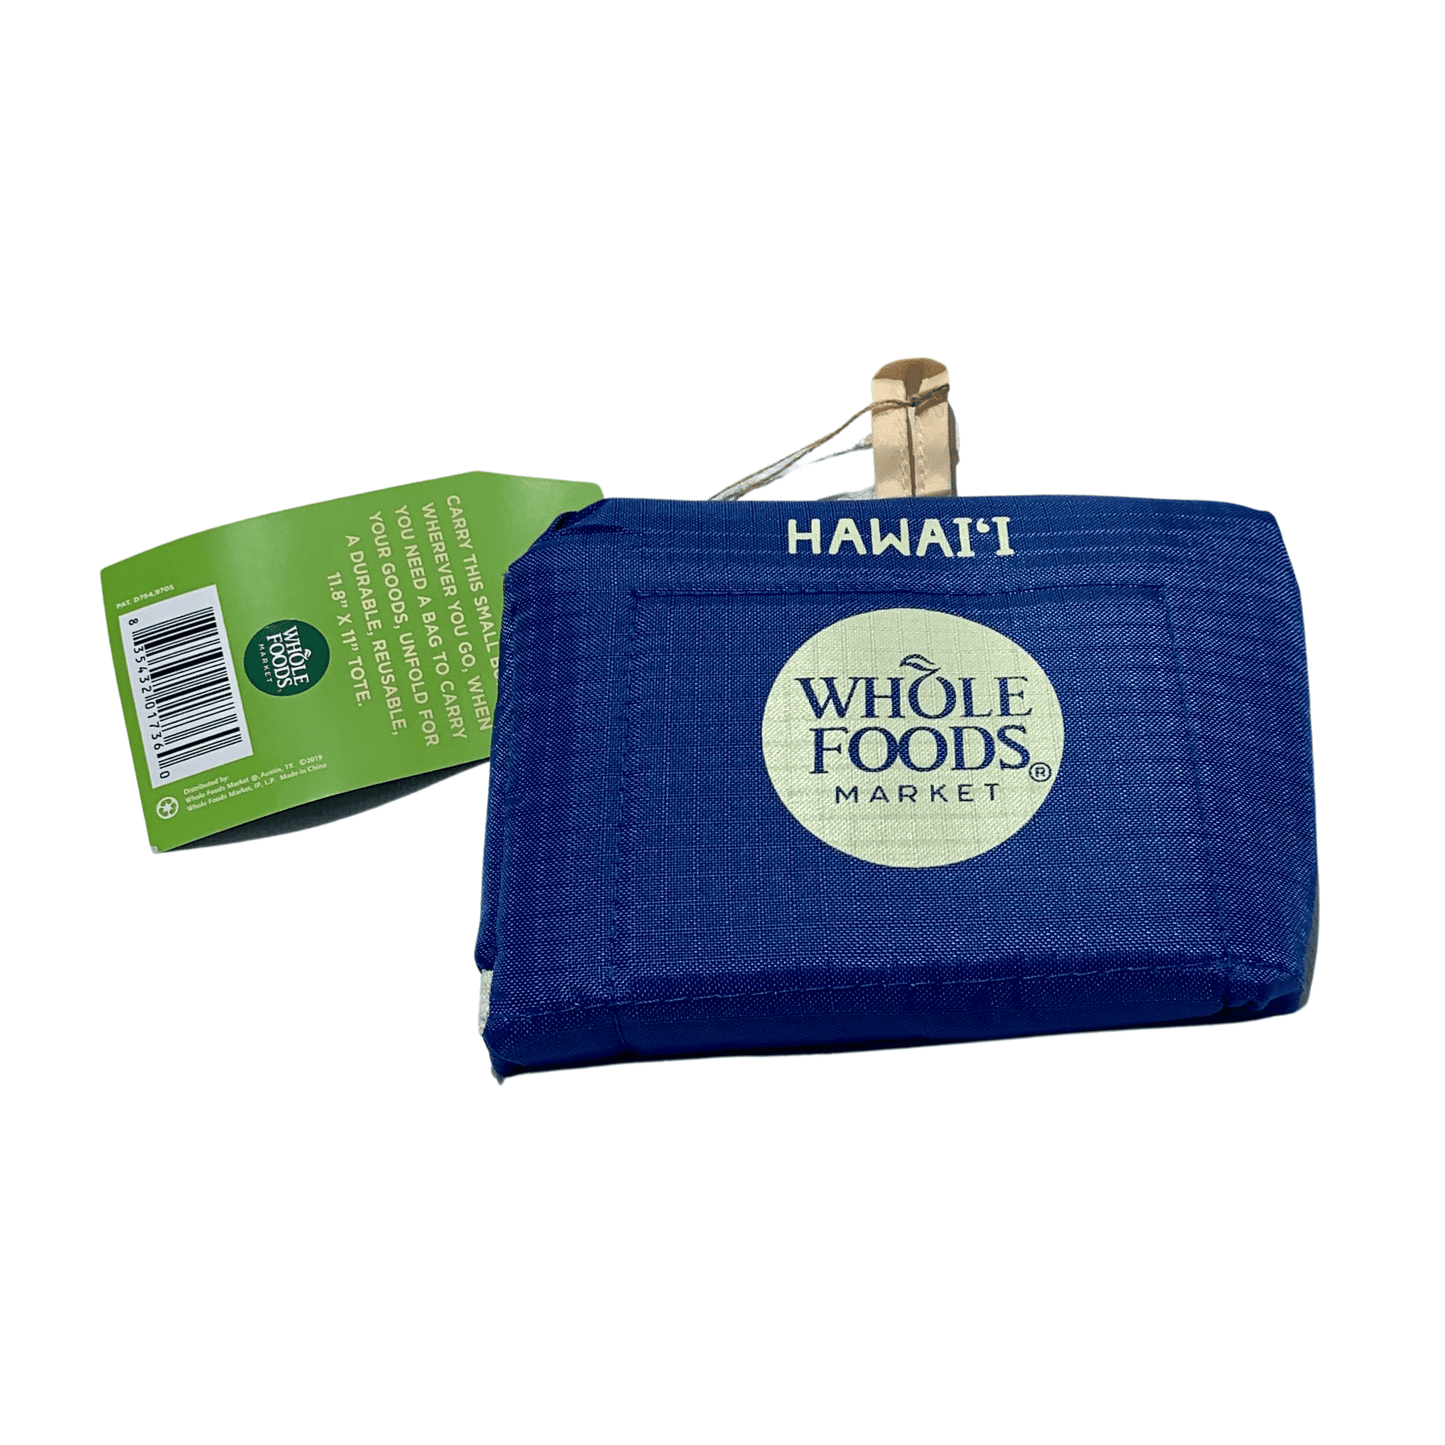 WHOLE FOODS MARKET コンパクトエコバッグ ブルー L